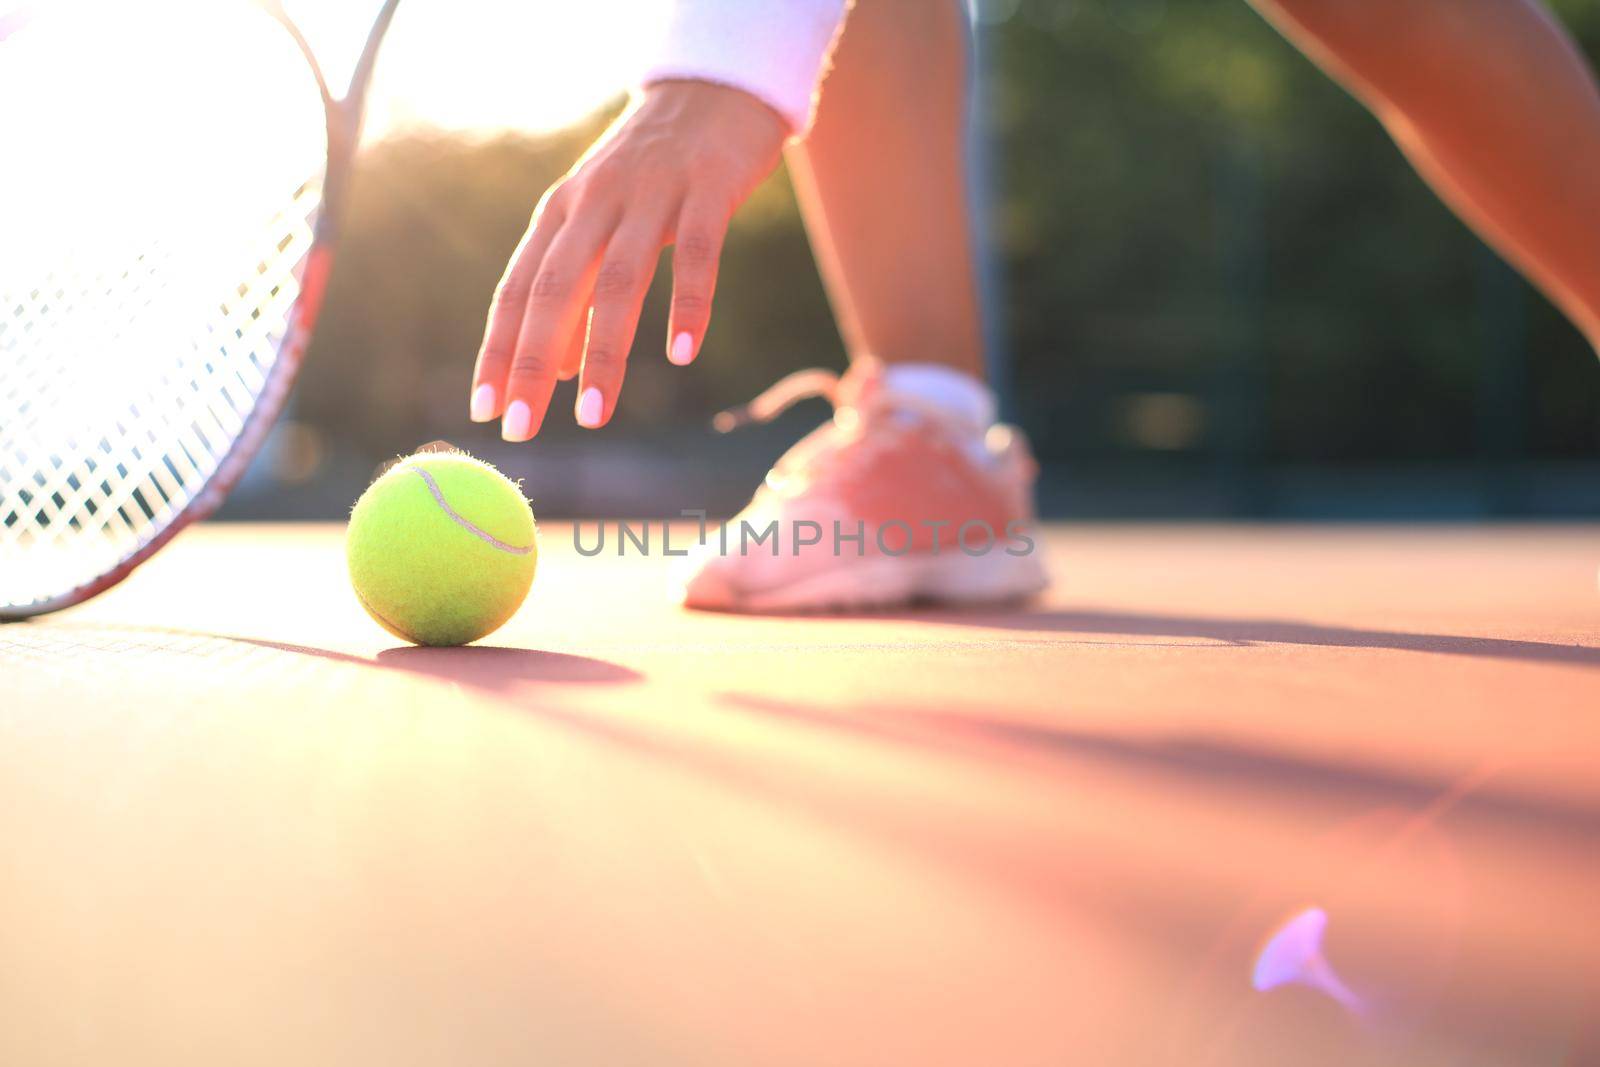 Tennis player raises a tennis ball from the clay court during the game. by tsyhun